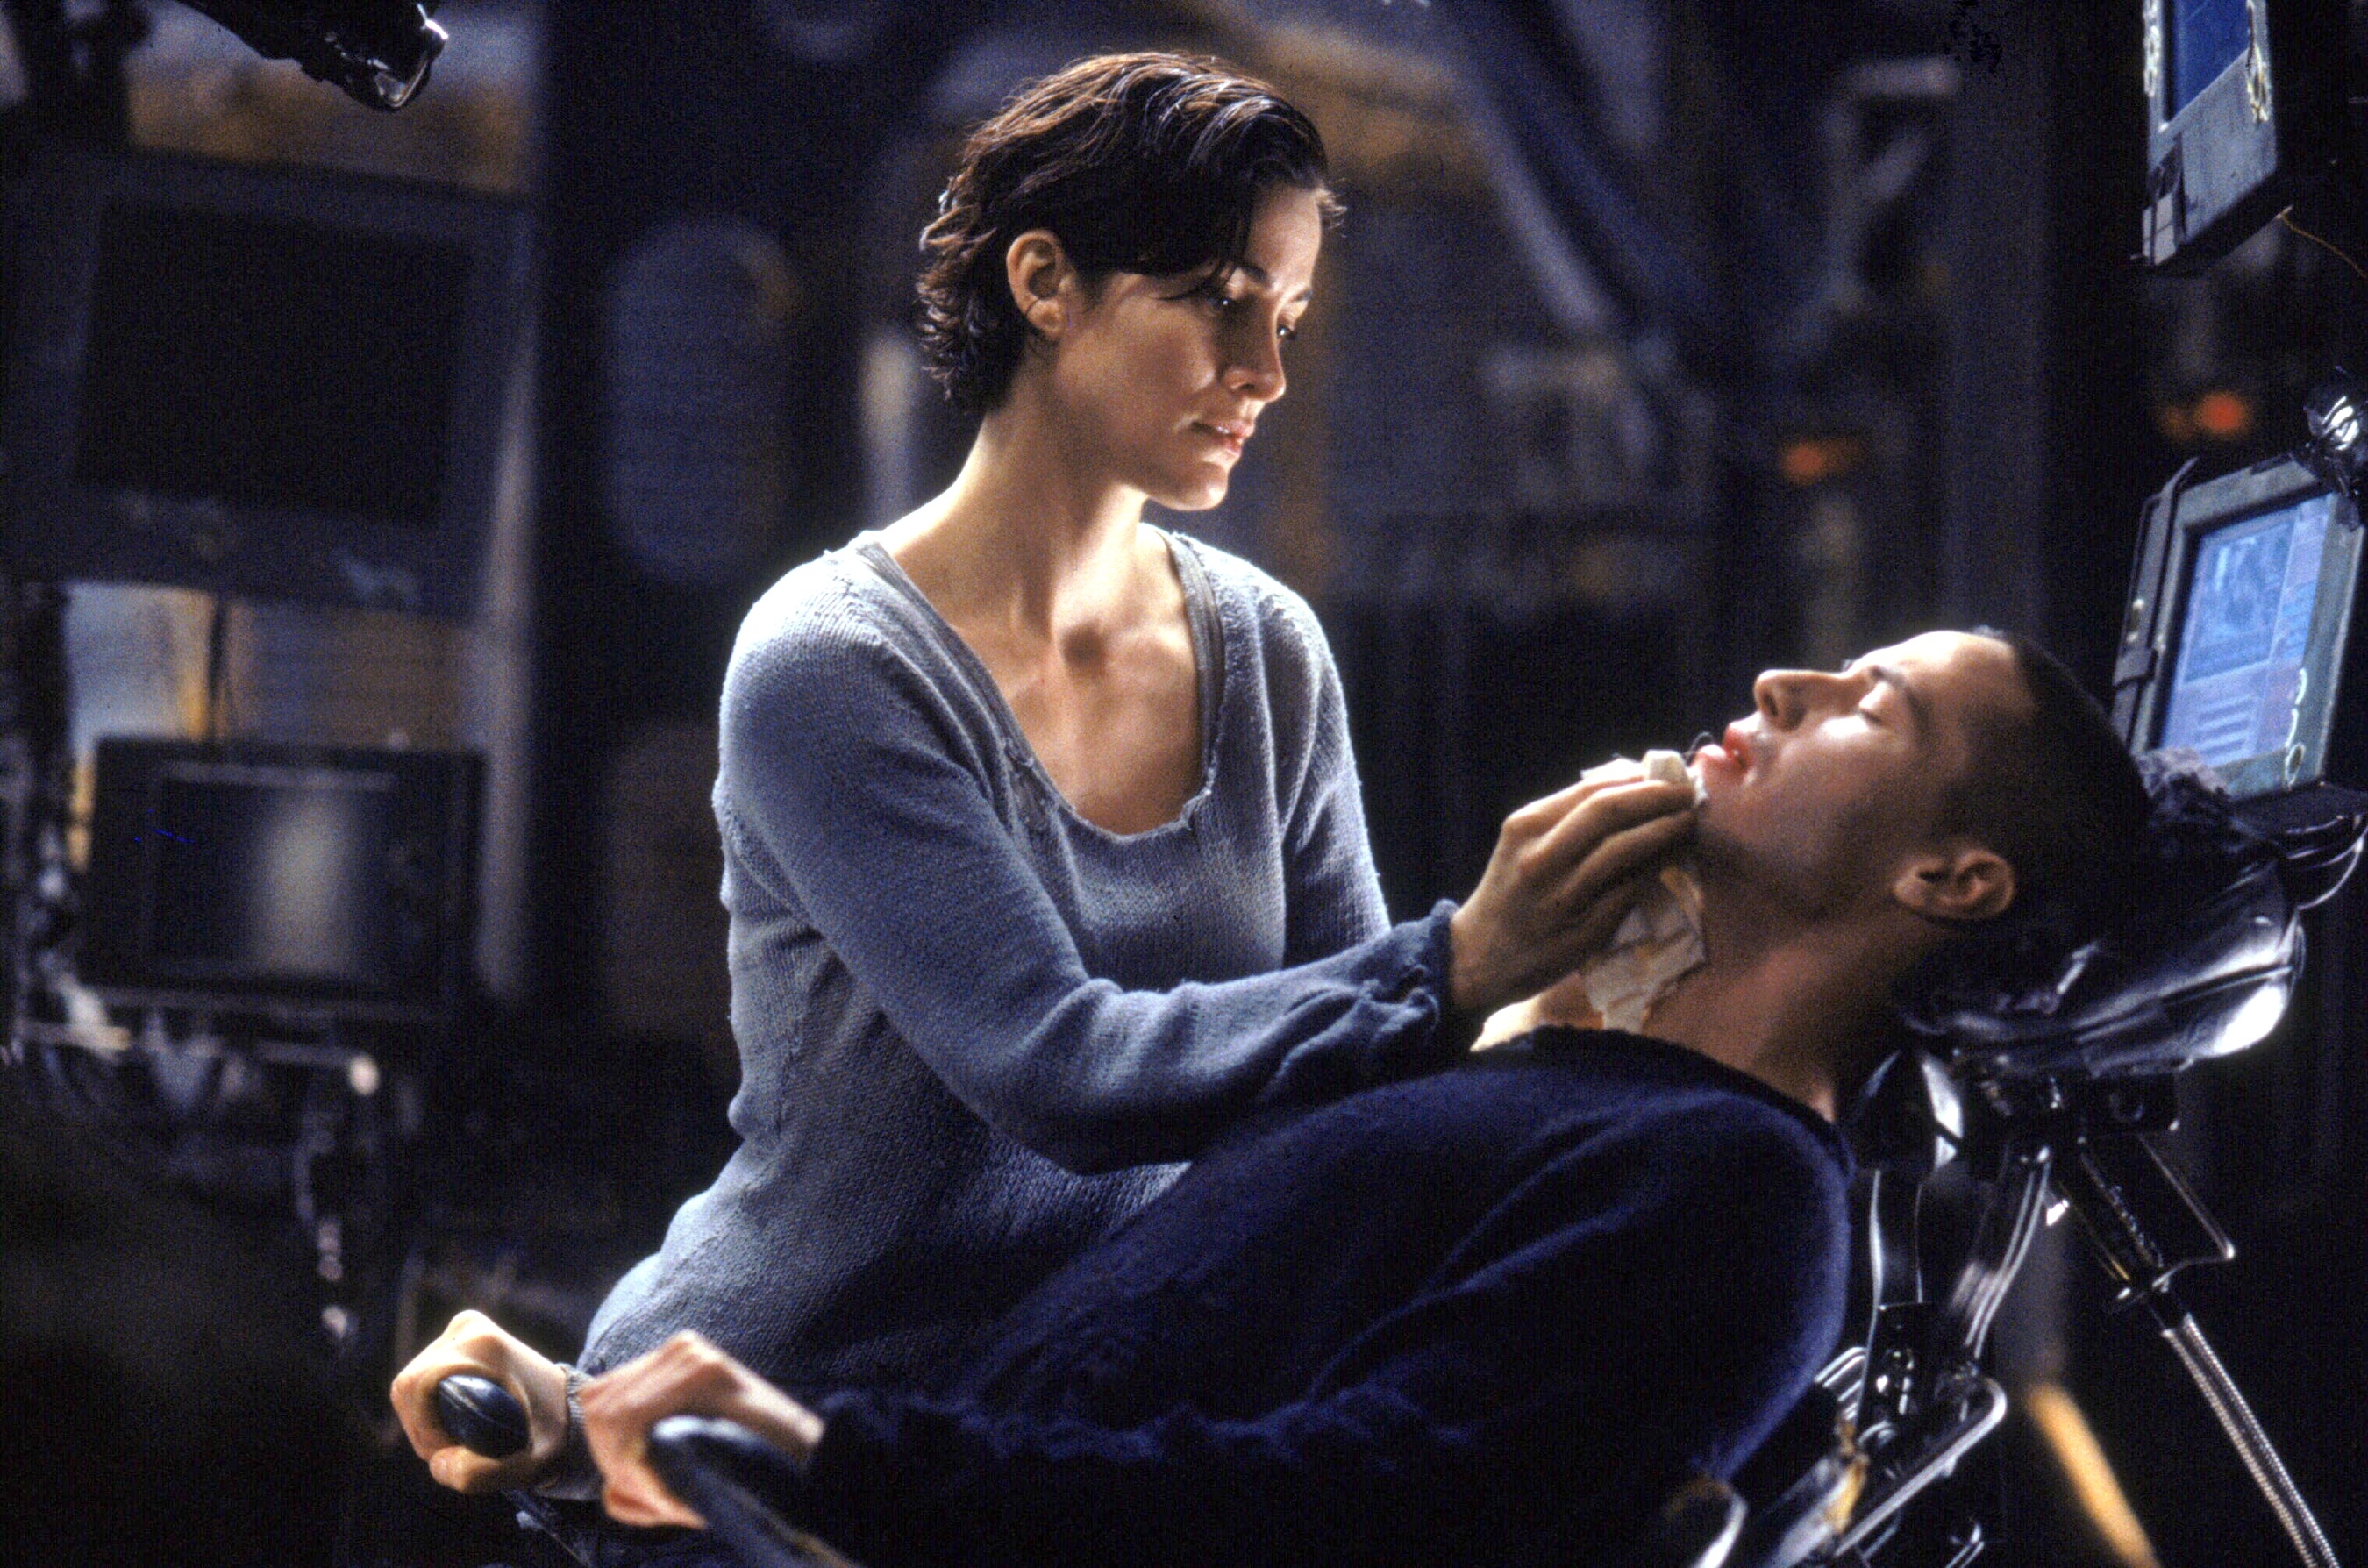 THE MATRIX, Carrie-Anne Moss, Keanu Reeves, 1999. (c) Warner Bros./ Courtesy: Everett Collection.